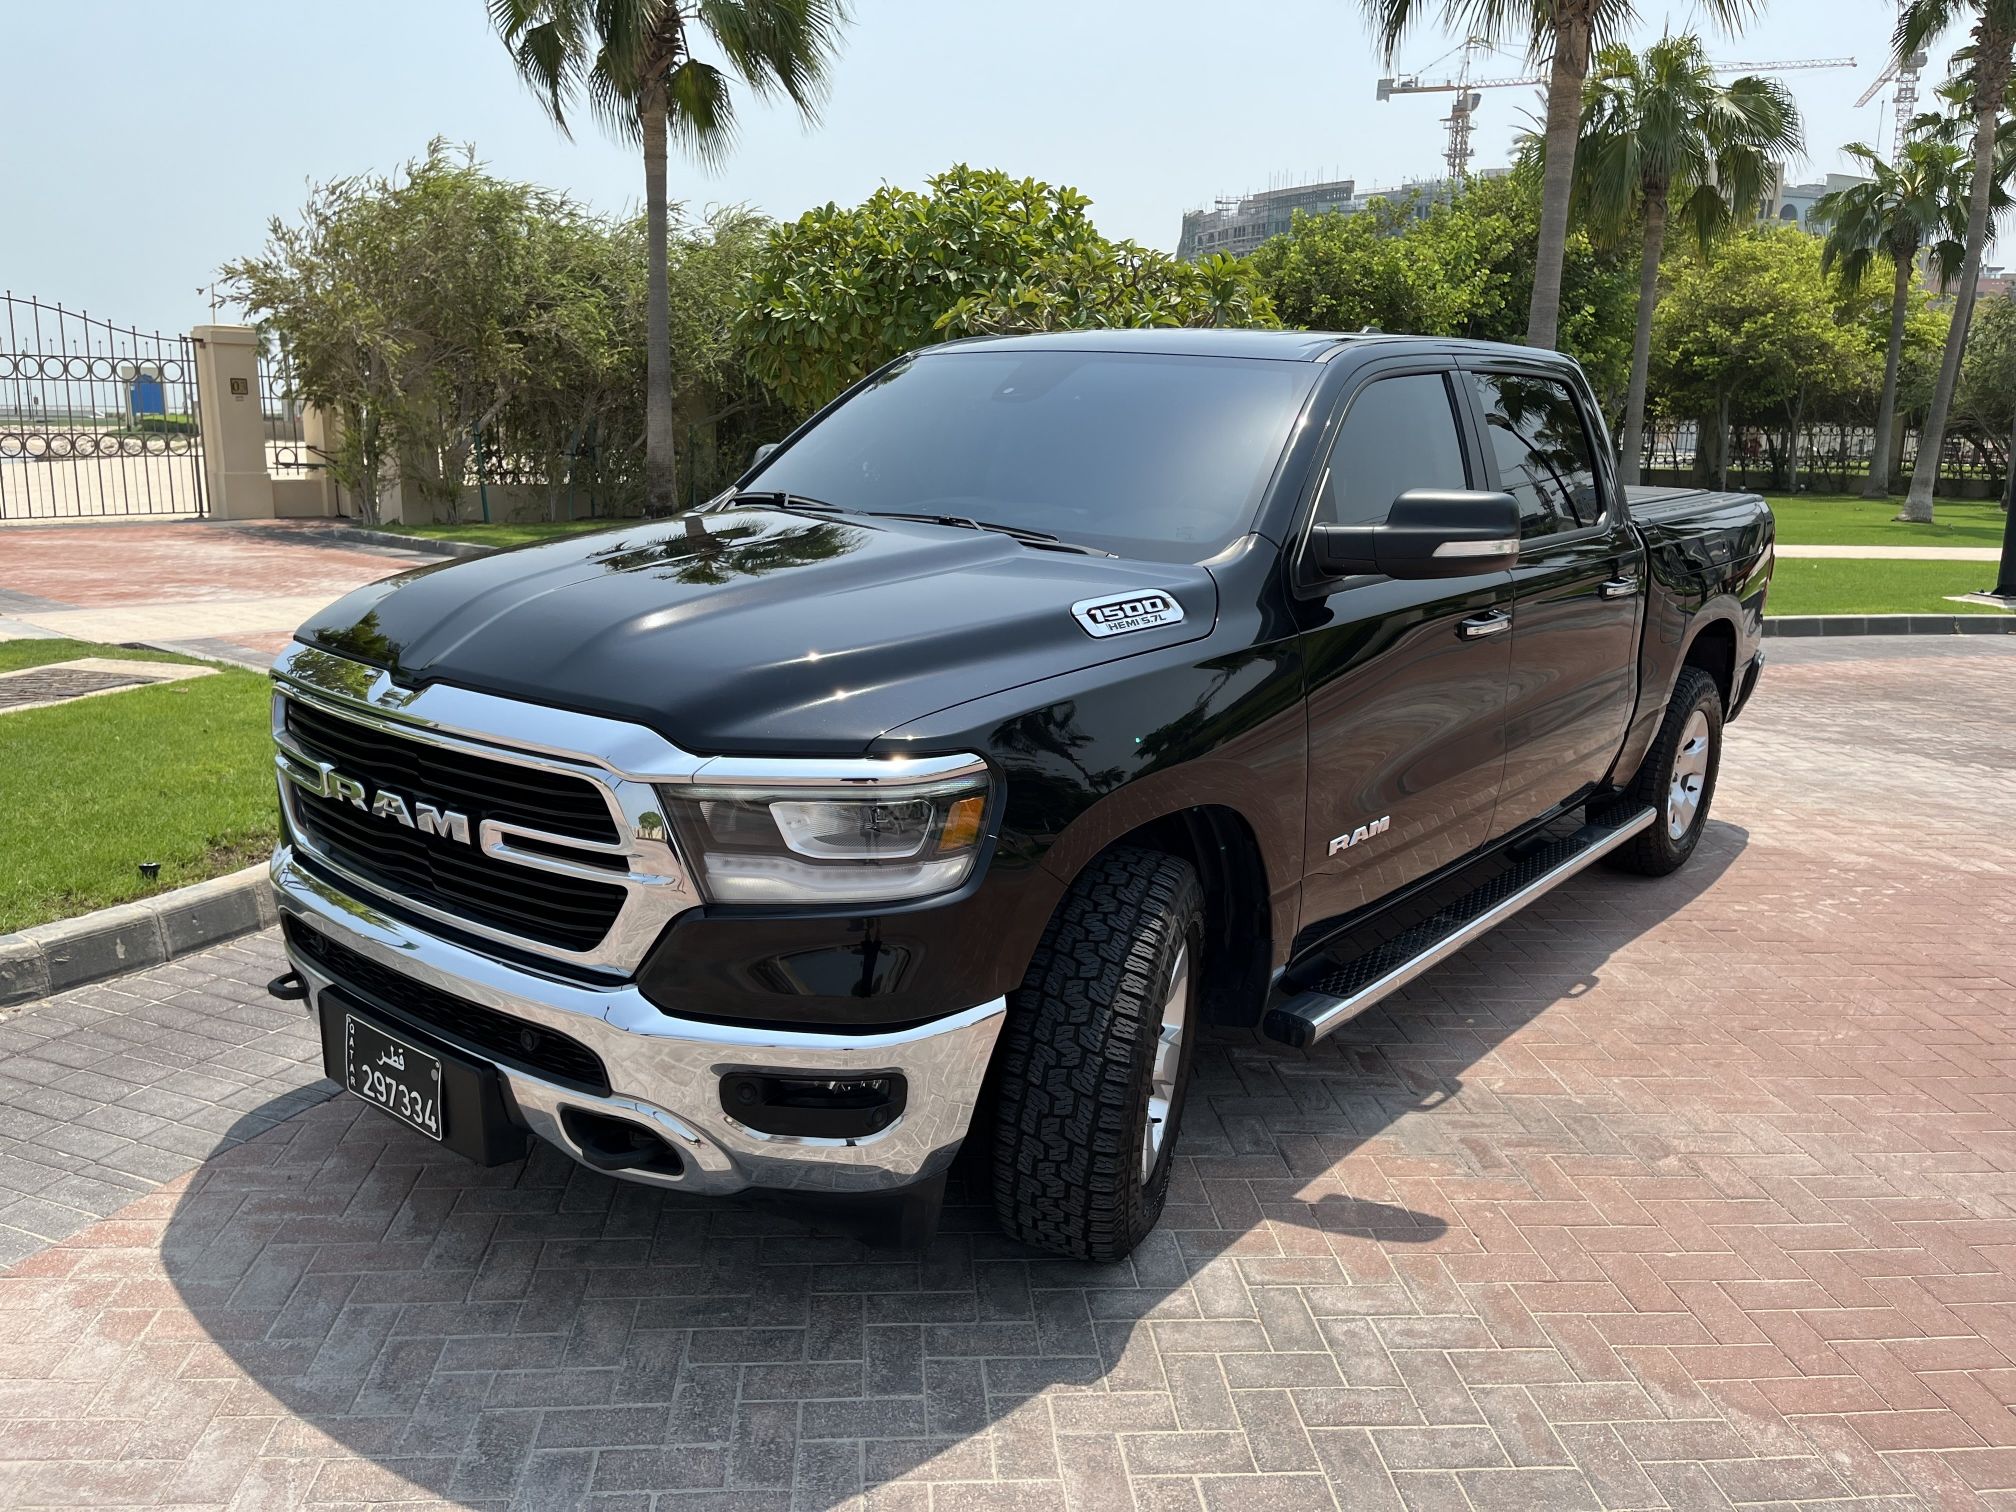 Dodge Ram 1500 2019 Automatic 69,700 Km 8 Cylinder (4WD) With Warranty and Free Maintenance